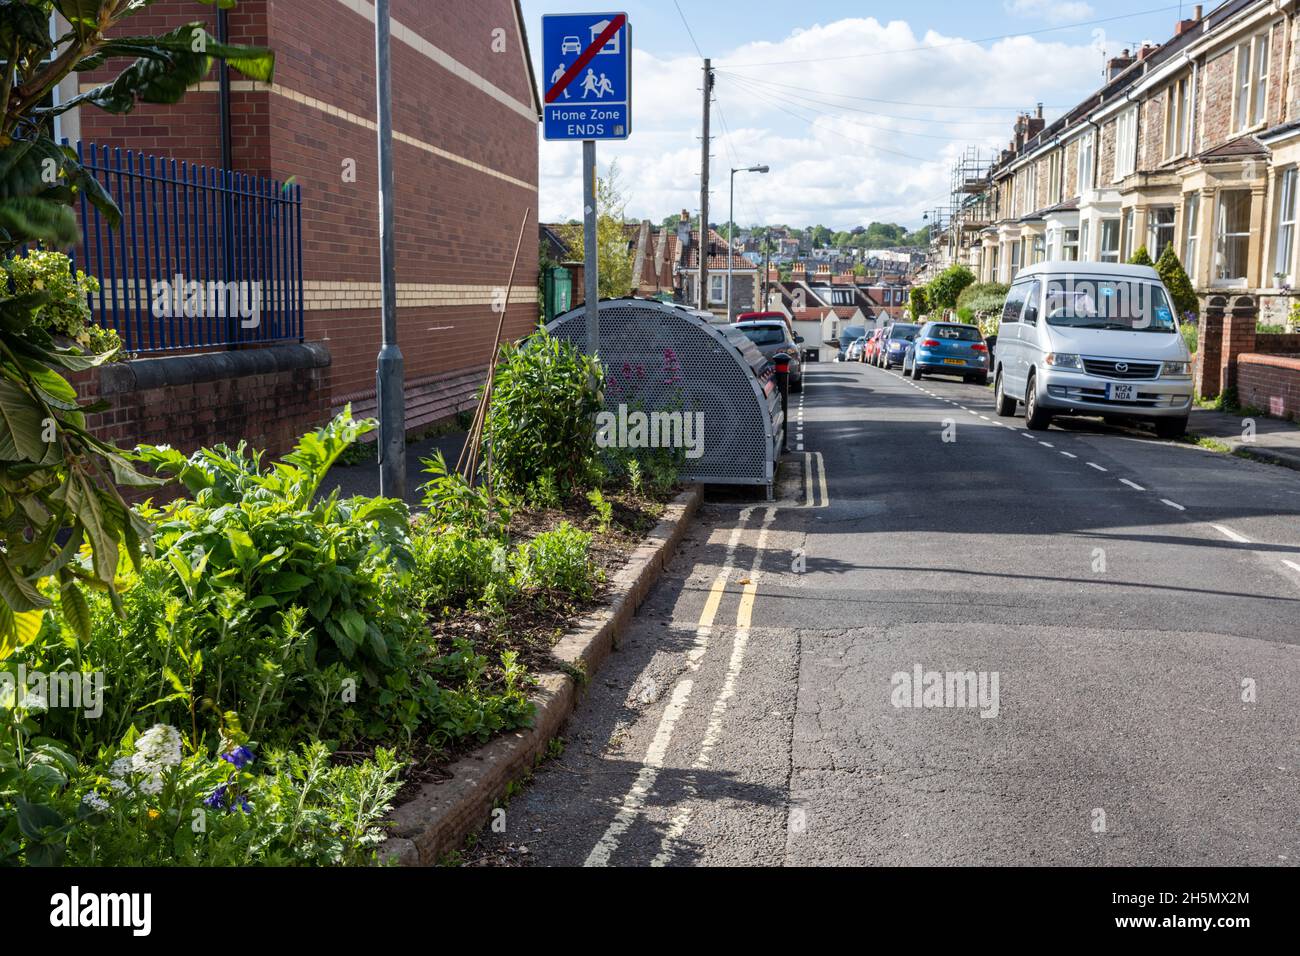 A planting border and a secure cycle parking 'Bike Hangar' contribute to traffic calming in a 'Home Zone' residential street in Bristol. Stock Photo